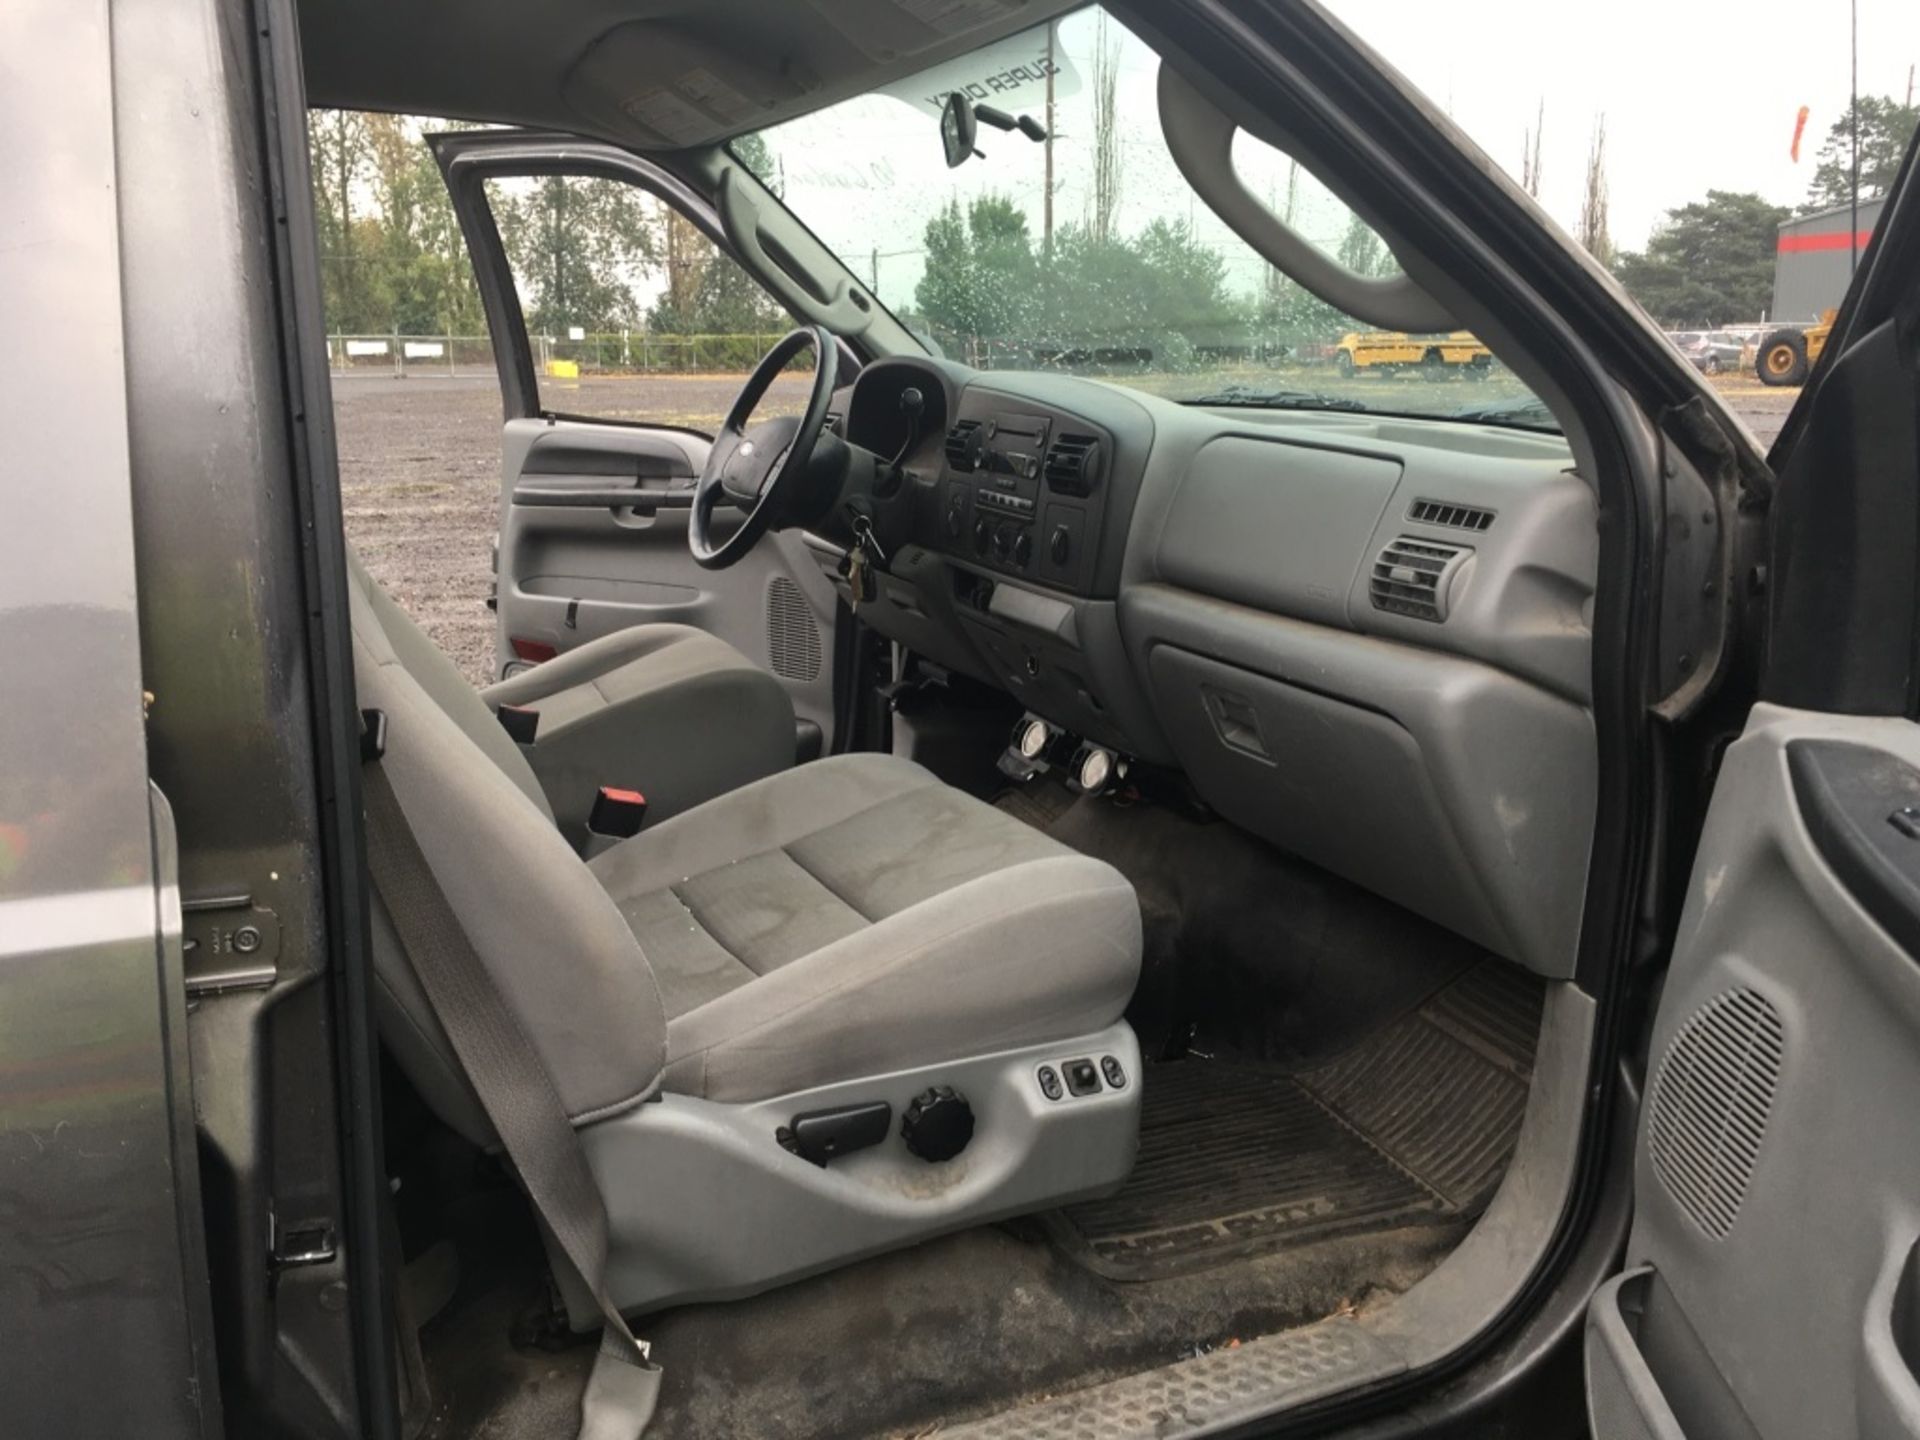 2007 Ford F350 XLT 4x4 Crew Cab Pickup - Image 16 of 30